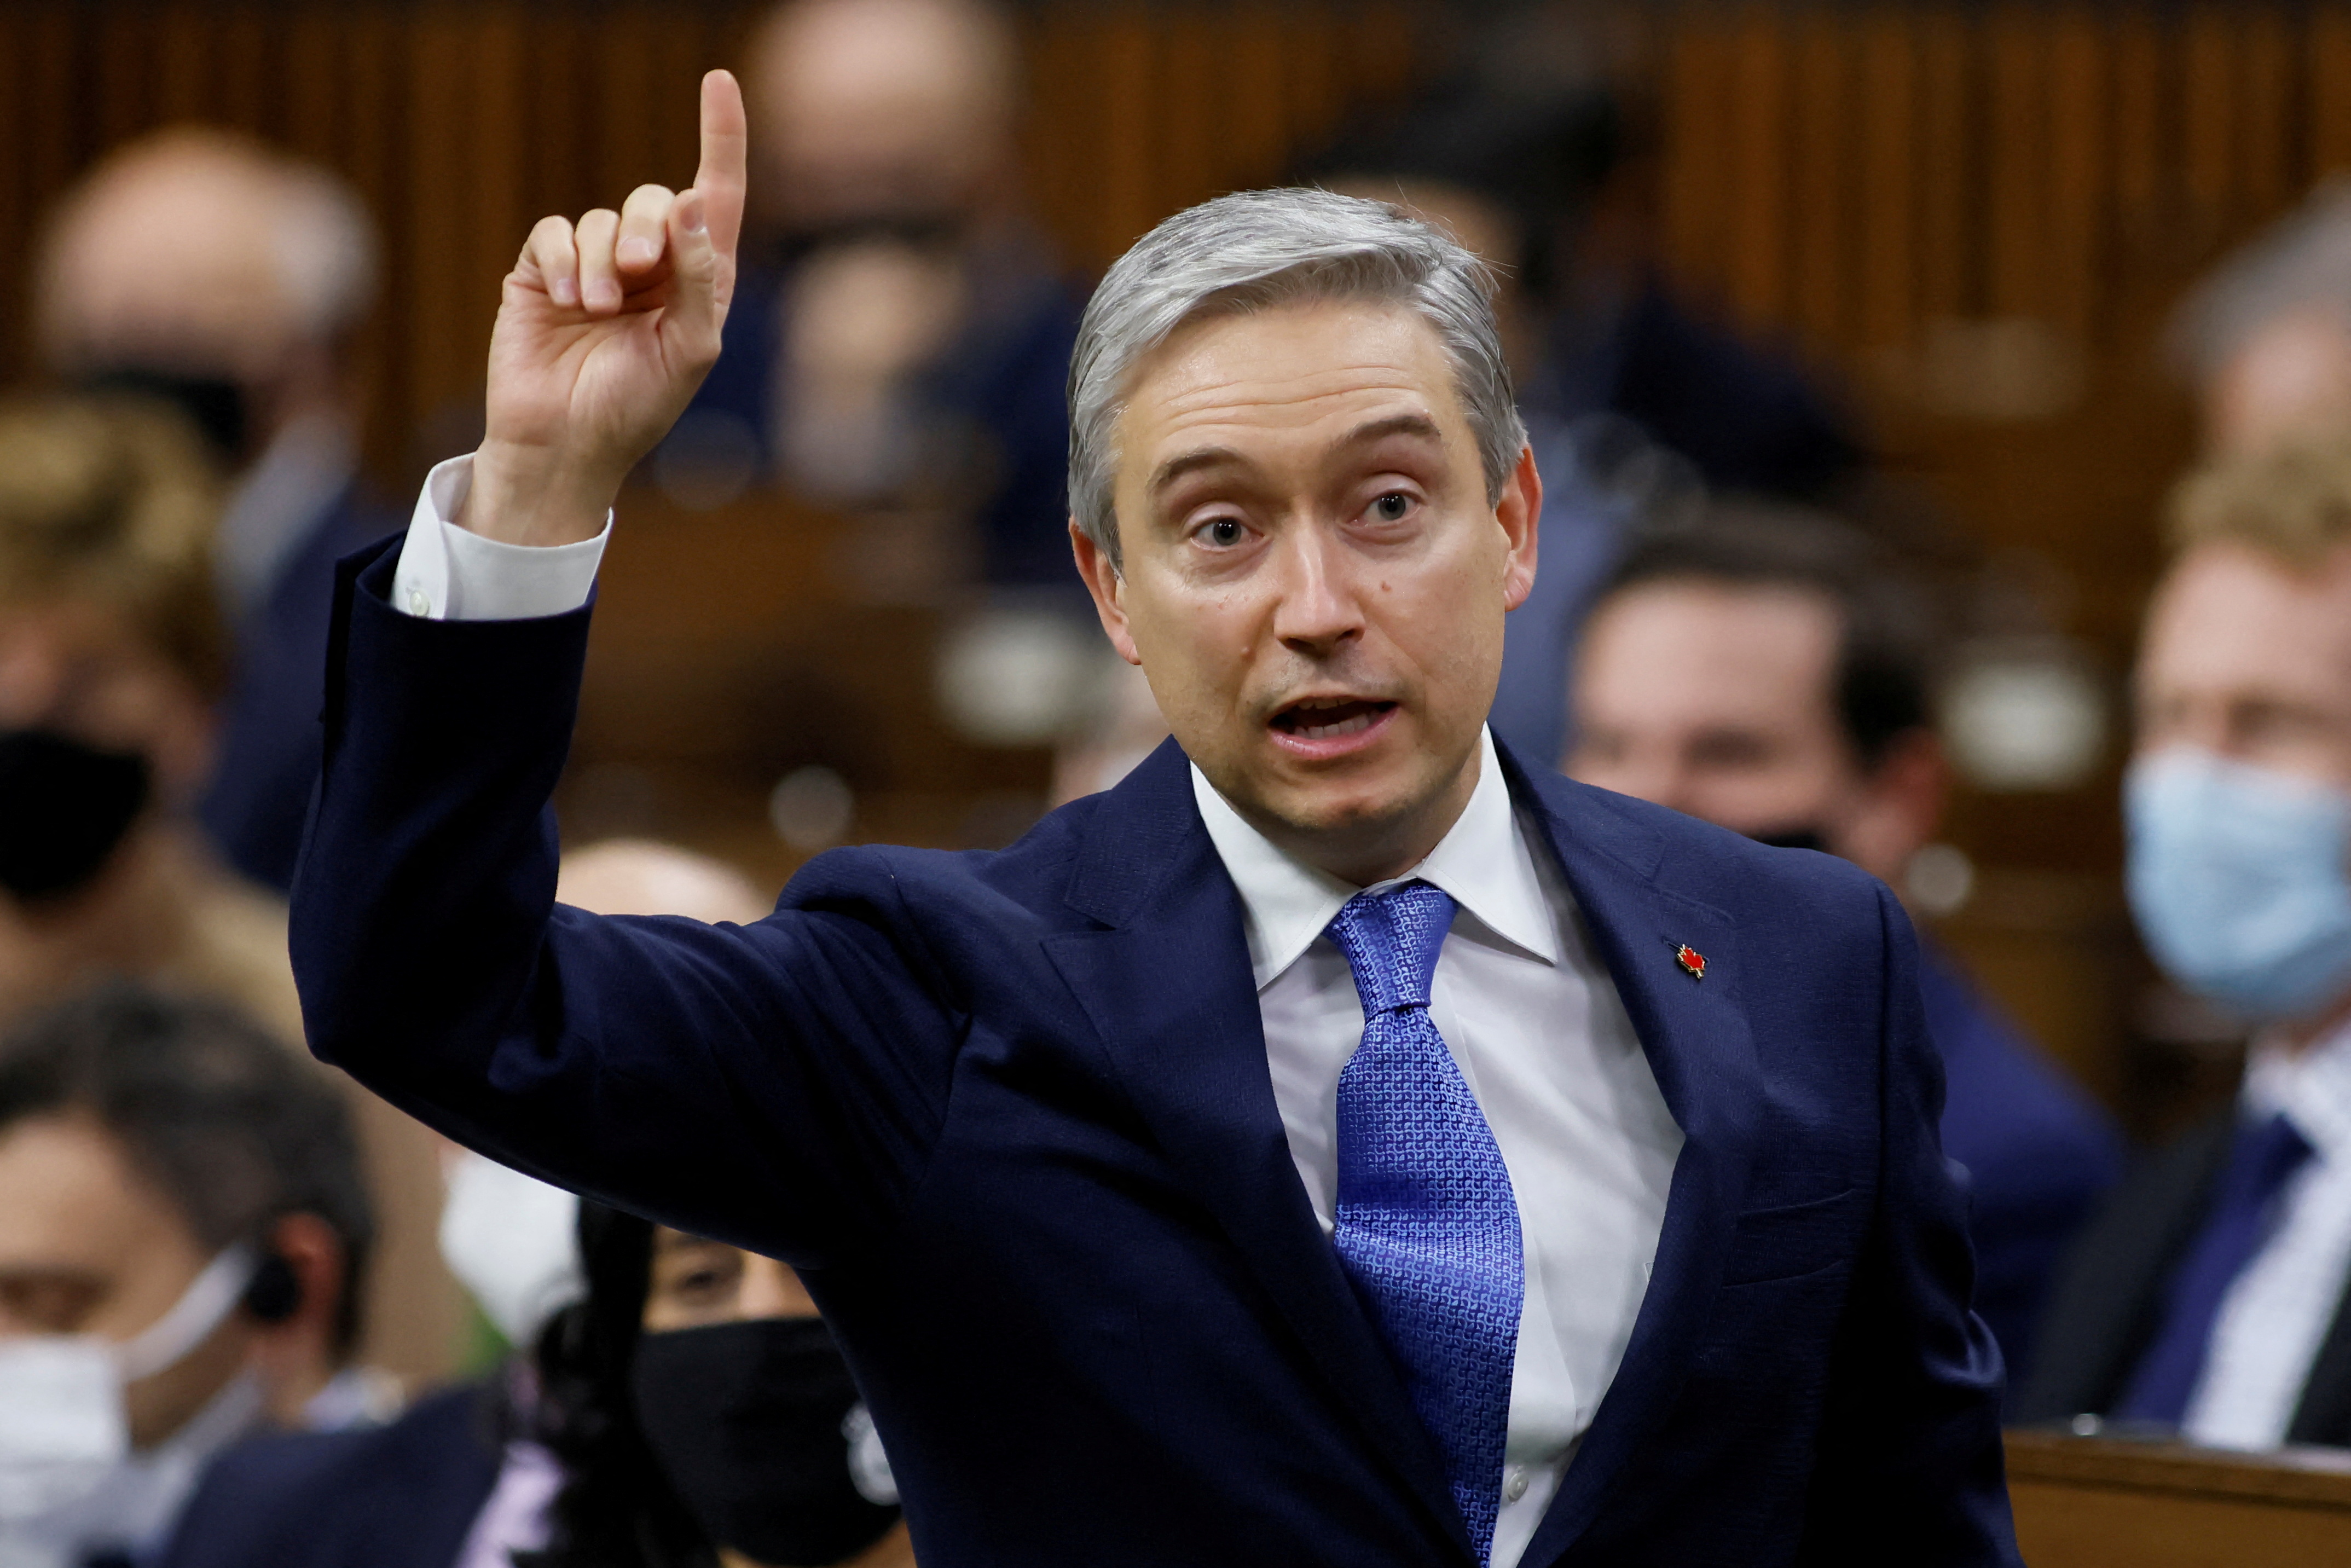 Canada's Minister of Innovation, Science and Industry Francois-Philippe Champagne speaks during Question Period in the House of Commons on Parliament Hill in Ottawa